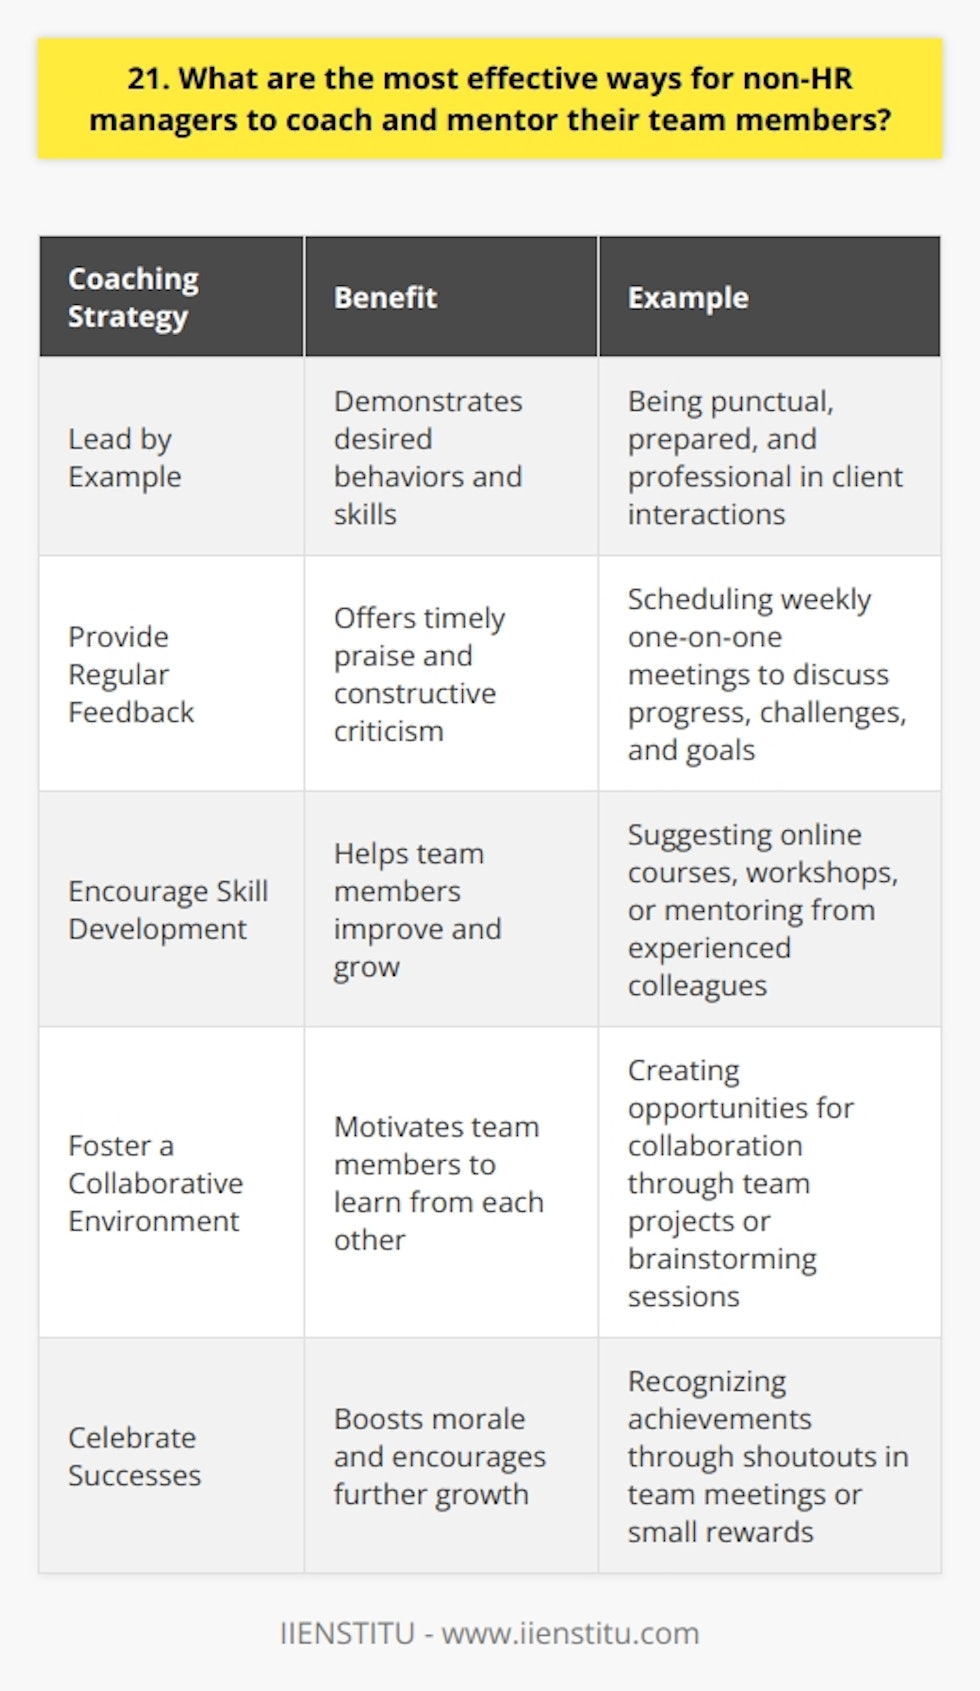 As a non-HR manager, there are several effective ways to coach and mentor your team members: Lead by Example Ive found that the best way to coach is to demonstrate the behaviors and skills you want to see. When I was managing a sales team, I made sure to always be punctual, prepared, and professional in my interactions with clients. By setting a good example, my team members naturally followed suit. Provide Regular Feedback Dont wait for annual performance reviews to give feedback. Offer praise and constructive criticism on a regular basis. I like to schedule weekly one-on-one meetings with each team member to discuss their progress, challenges, and goals. Encourage Skill Development Identify areas where your team members can improve and provide resources for them to develop those skills. This could include online courses, workshops, or mentoring from more experienced colleagues. When one of my team members expressed interest in improving their public speaking skills, I encouraged them to join a local Toastmasters club. Foster a Collaborative Environment Encourage your team members to work together and learn from each other. Create opportunities for collaboration, such as team projects or brainstorming sessions. Ive found that when team members feel like theyre part of a supportive community, theyre more motivated to grow and succeed. Celebrate Successes Dont forget to celebrate your teams wins, big and small. Recognizing achievements boosts morale and encourages further growth. Whether its a shoutout in a team meeting or a small reward, showing appreciation for hard work goes a long way. Remember, coaching and mentoring is an ongoing process. By consistently investing in your teams development, youll not only help them reach their full potential but also create a positive and productive work environment.